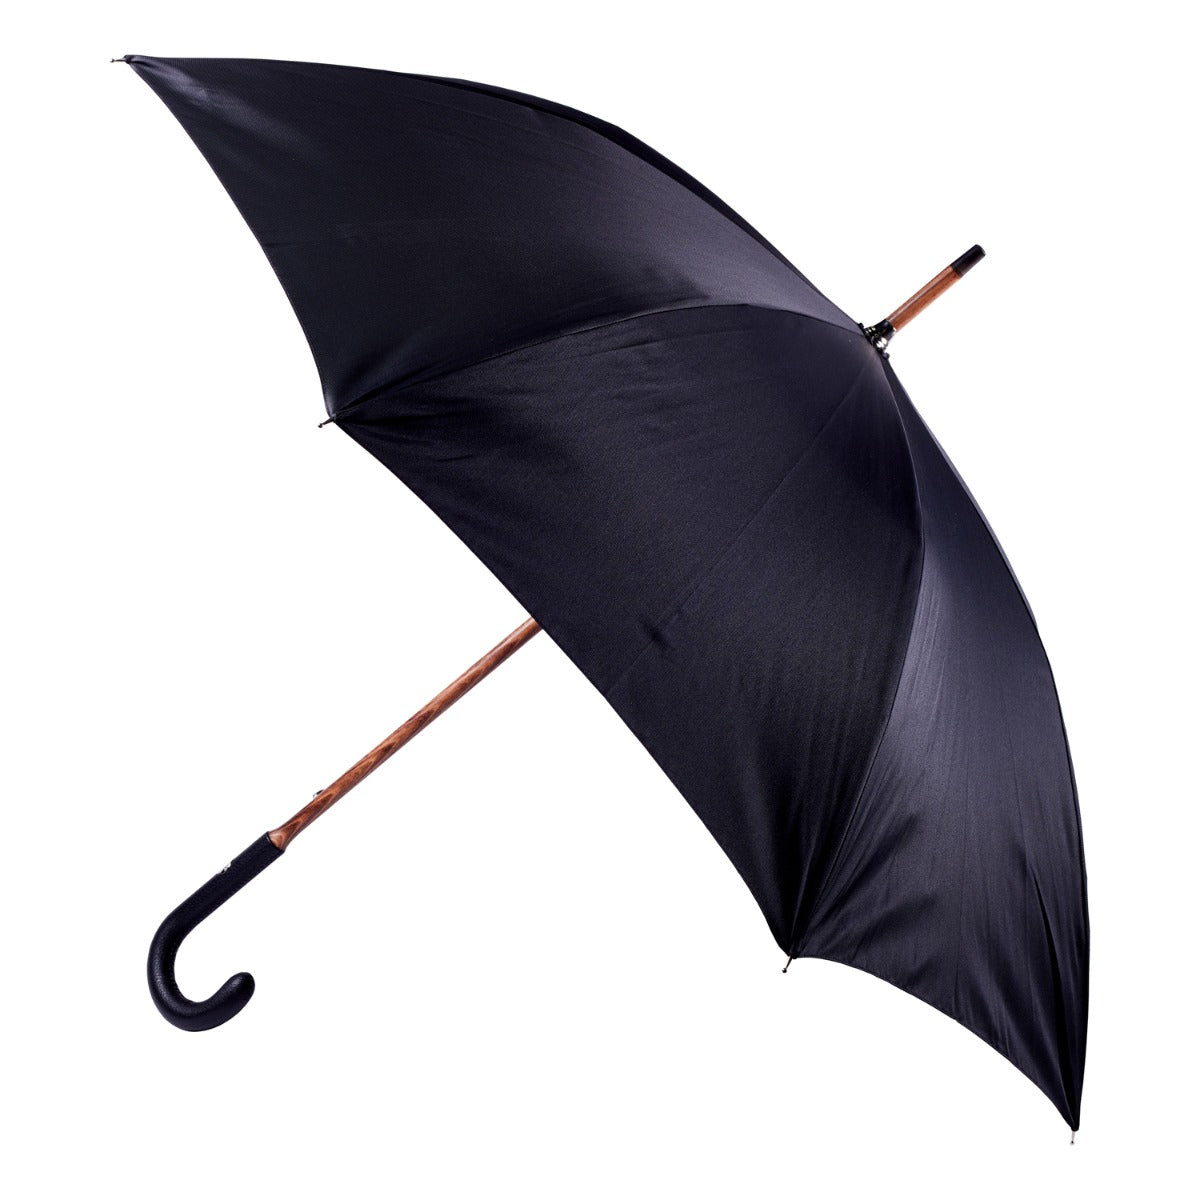 A handcrafted Black Pigskin Solid Stick Umbrella with Black Canopy from KirbyAllison.com on a white background.